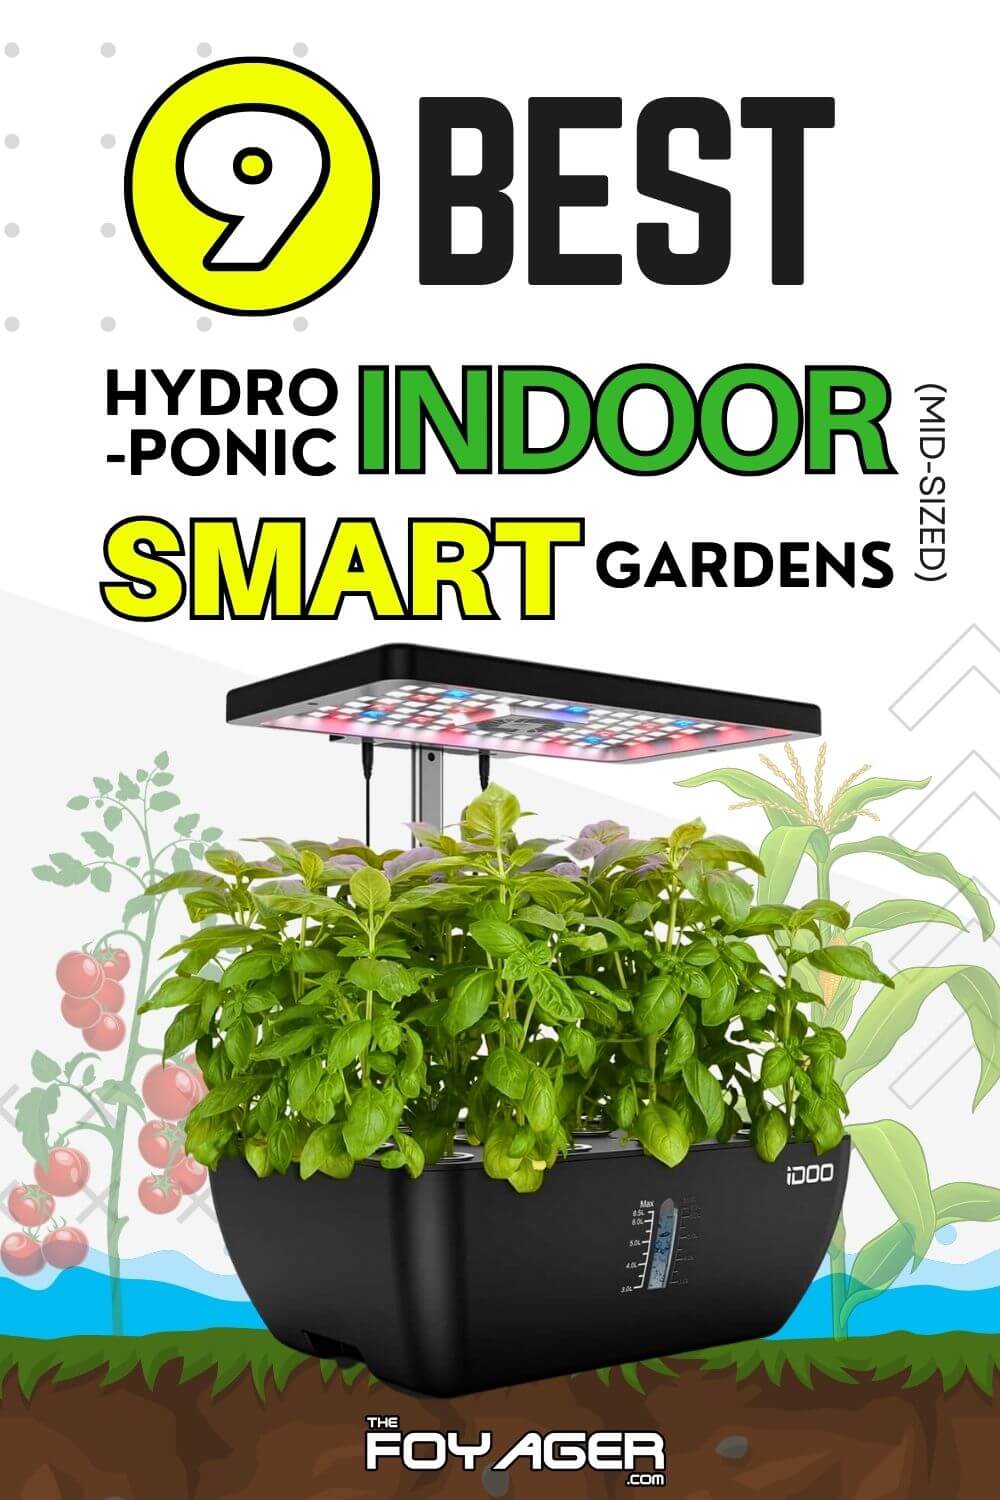 The 9 Best Hydroponic Indoor Smart Gardens (Mid-Sized)